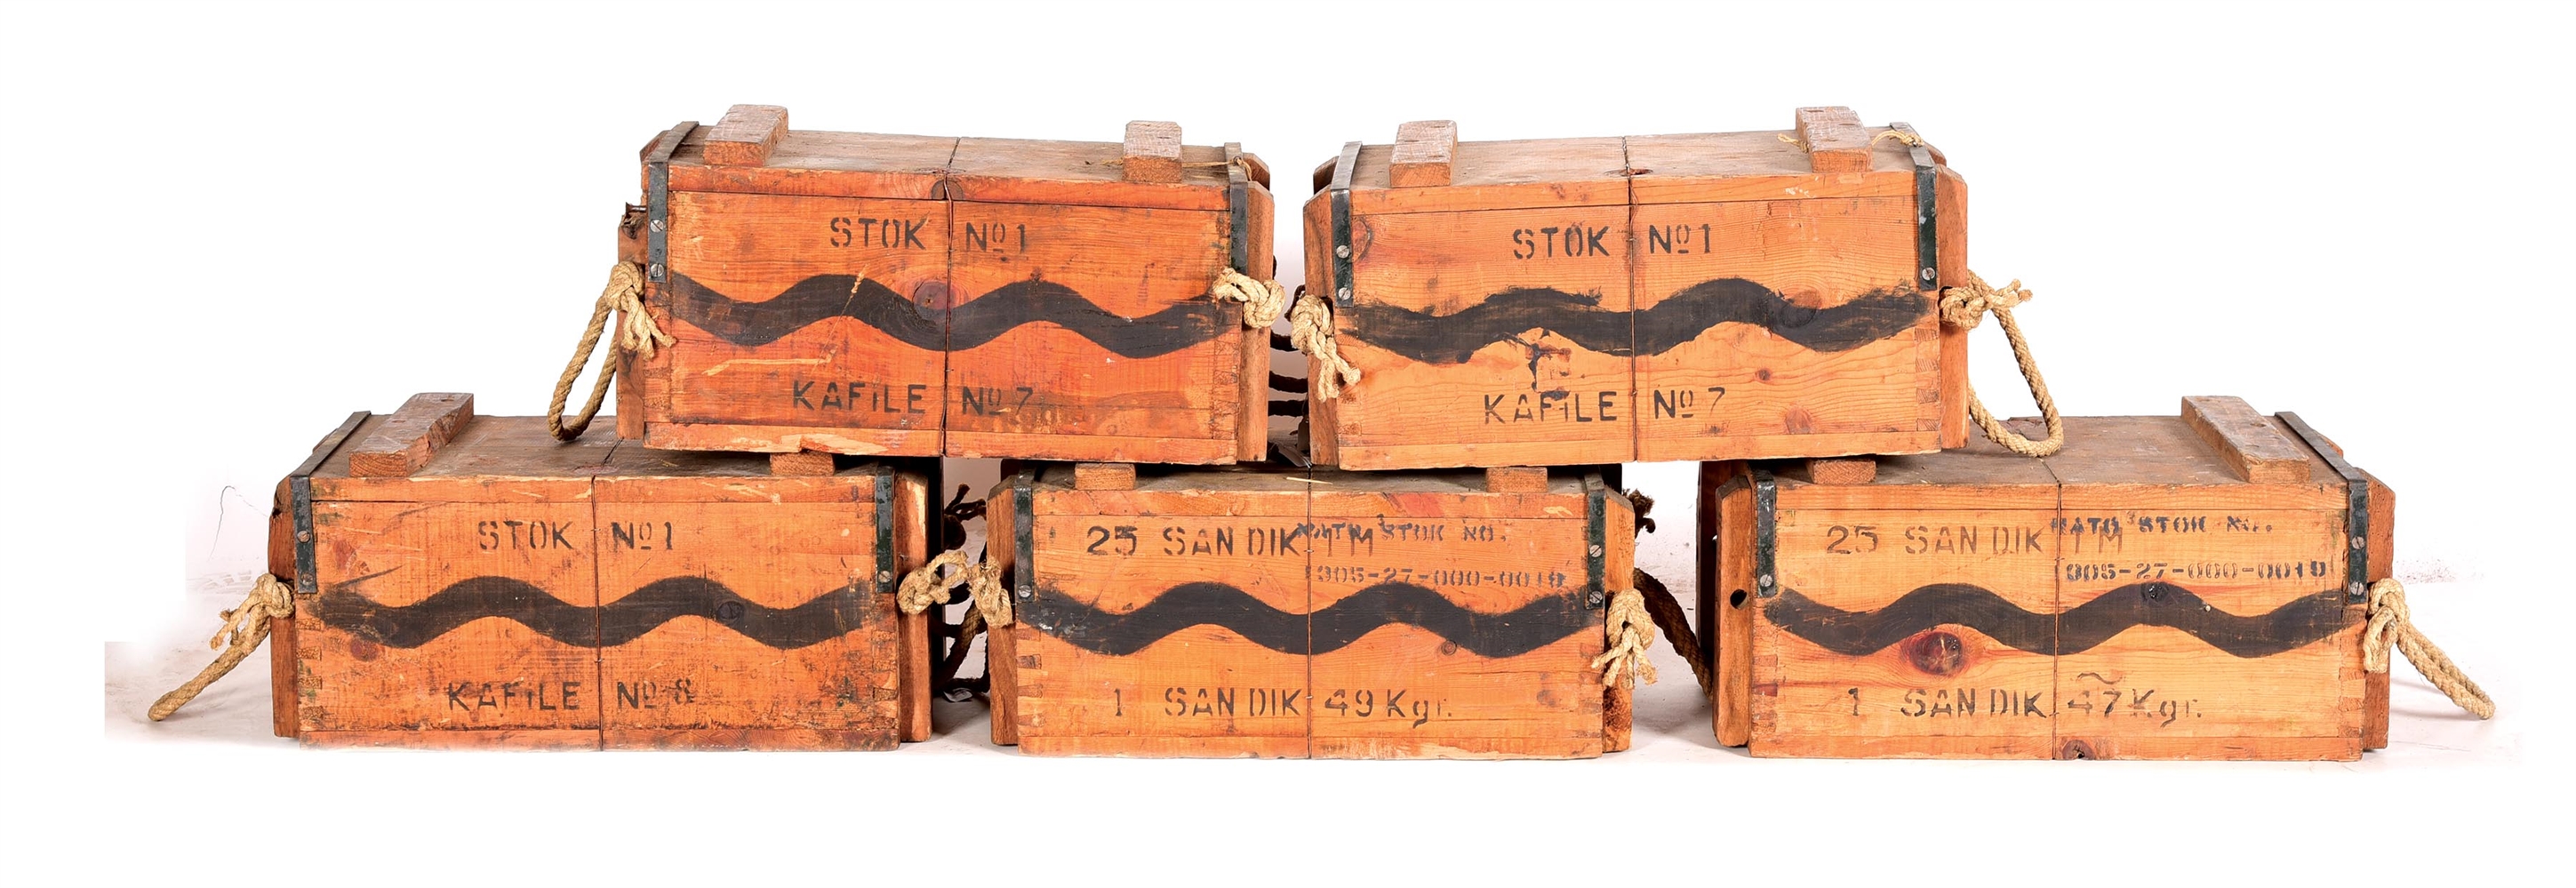 LOT OF 5: CRATES OF TURKISH 8MM MAUSER AMMUNITION (7000 ROUNDS).